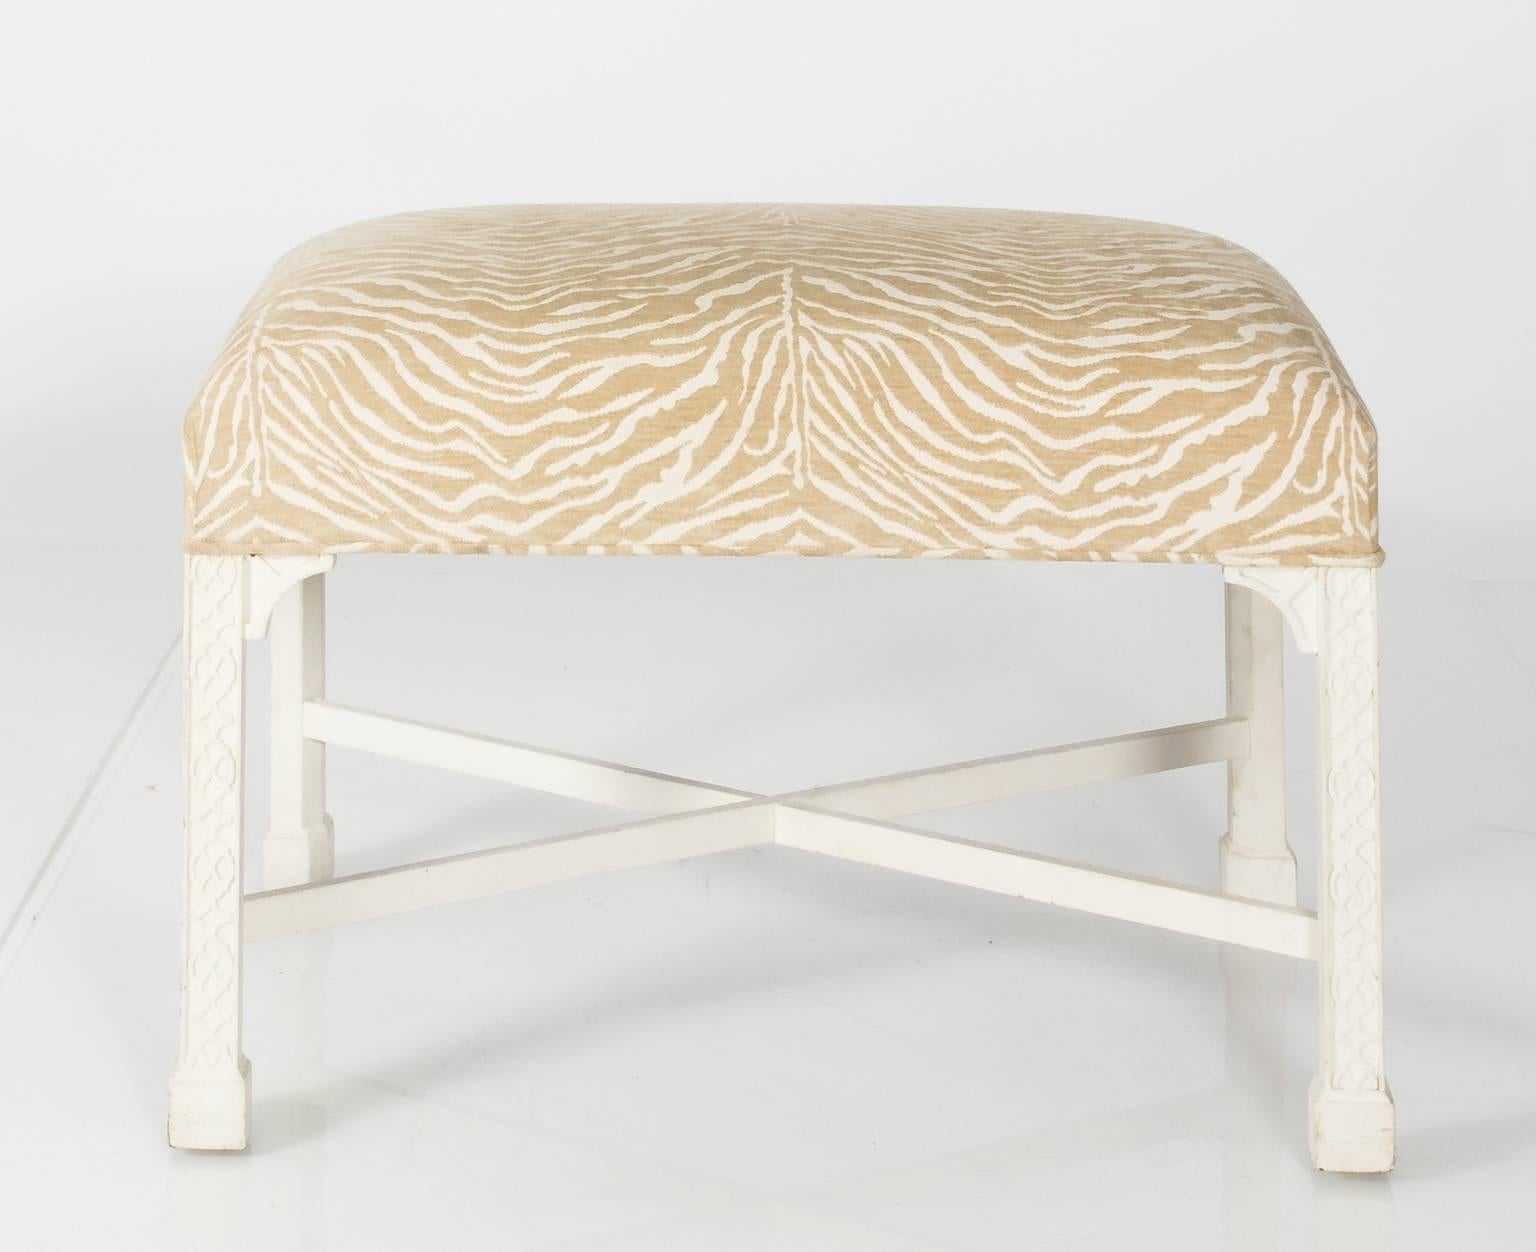 White painted Chinese Chippendale bench that features animal print upholstery and Marlborough legs, circa late 20th century.